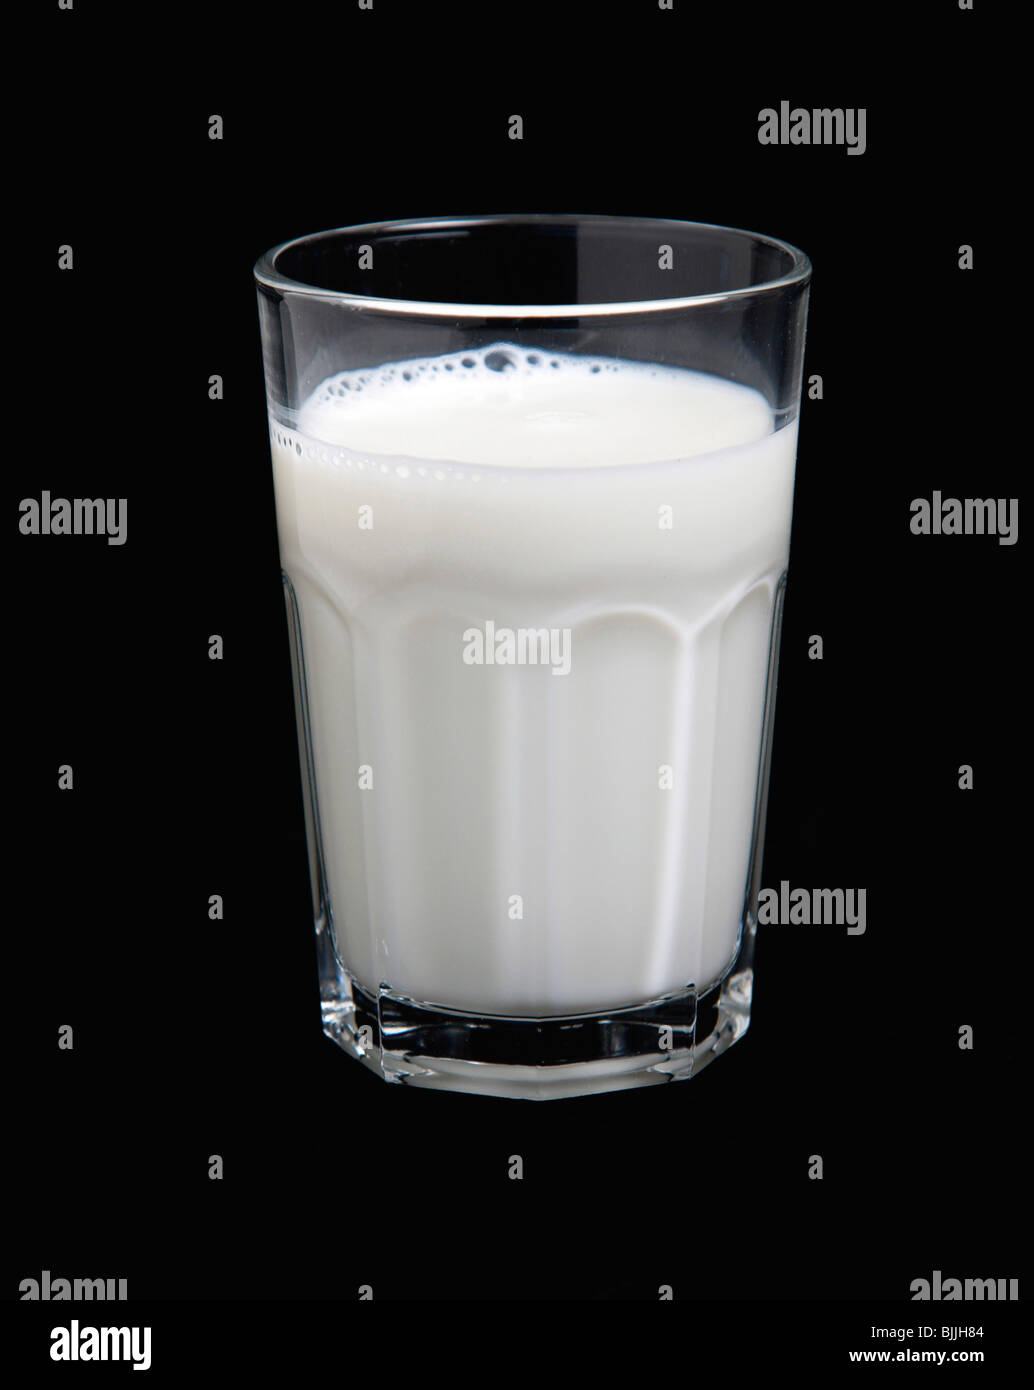 Drink, Milk, Tumbler glass of dairy milk against a black background Stock Photo